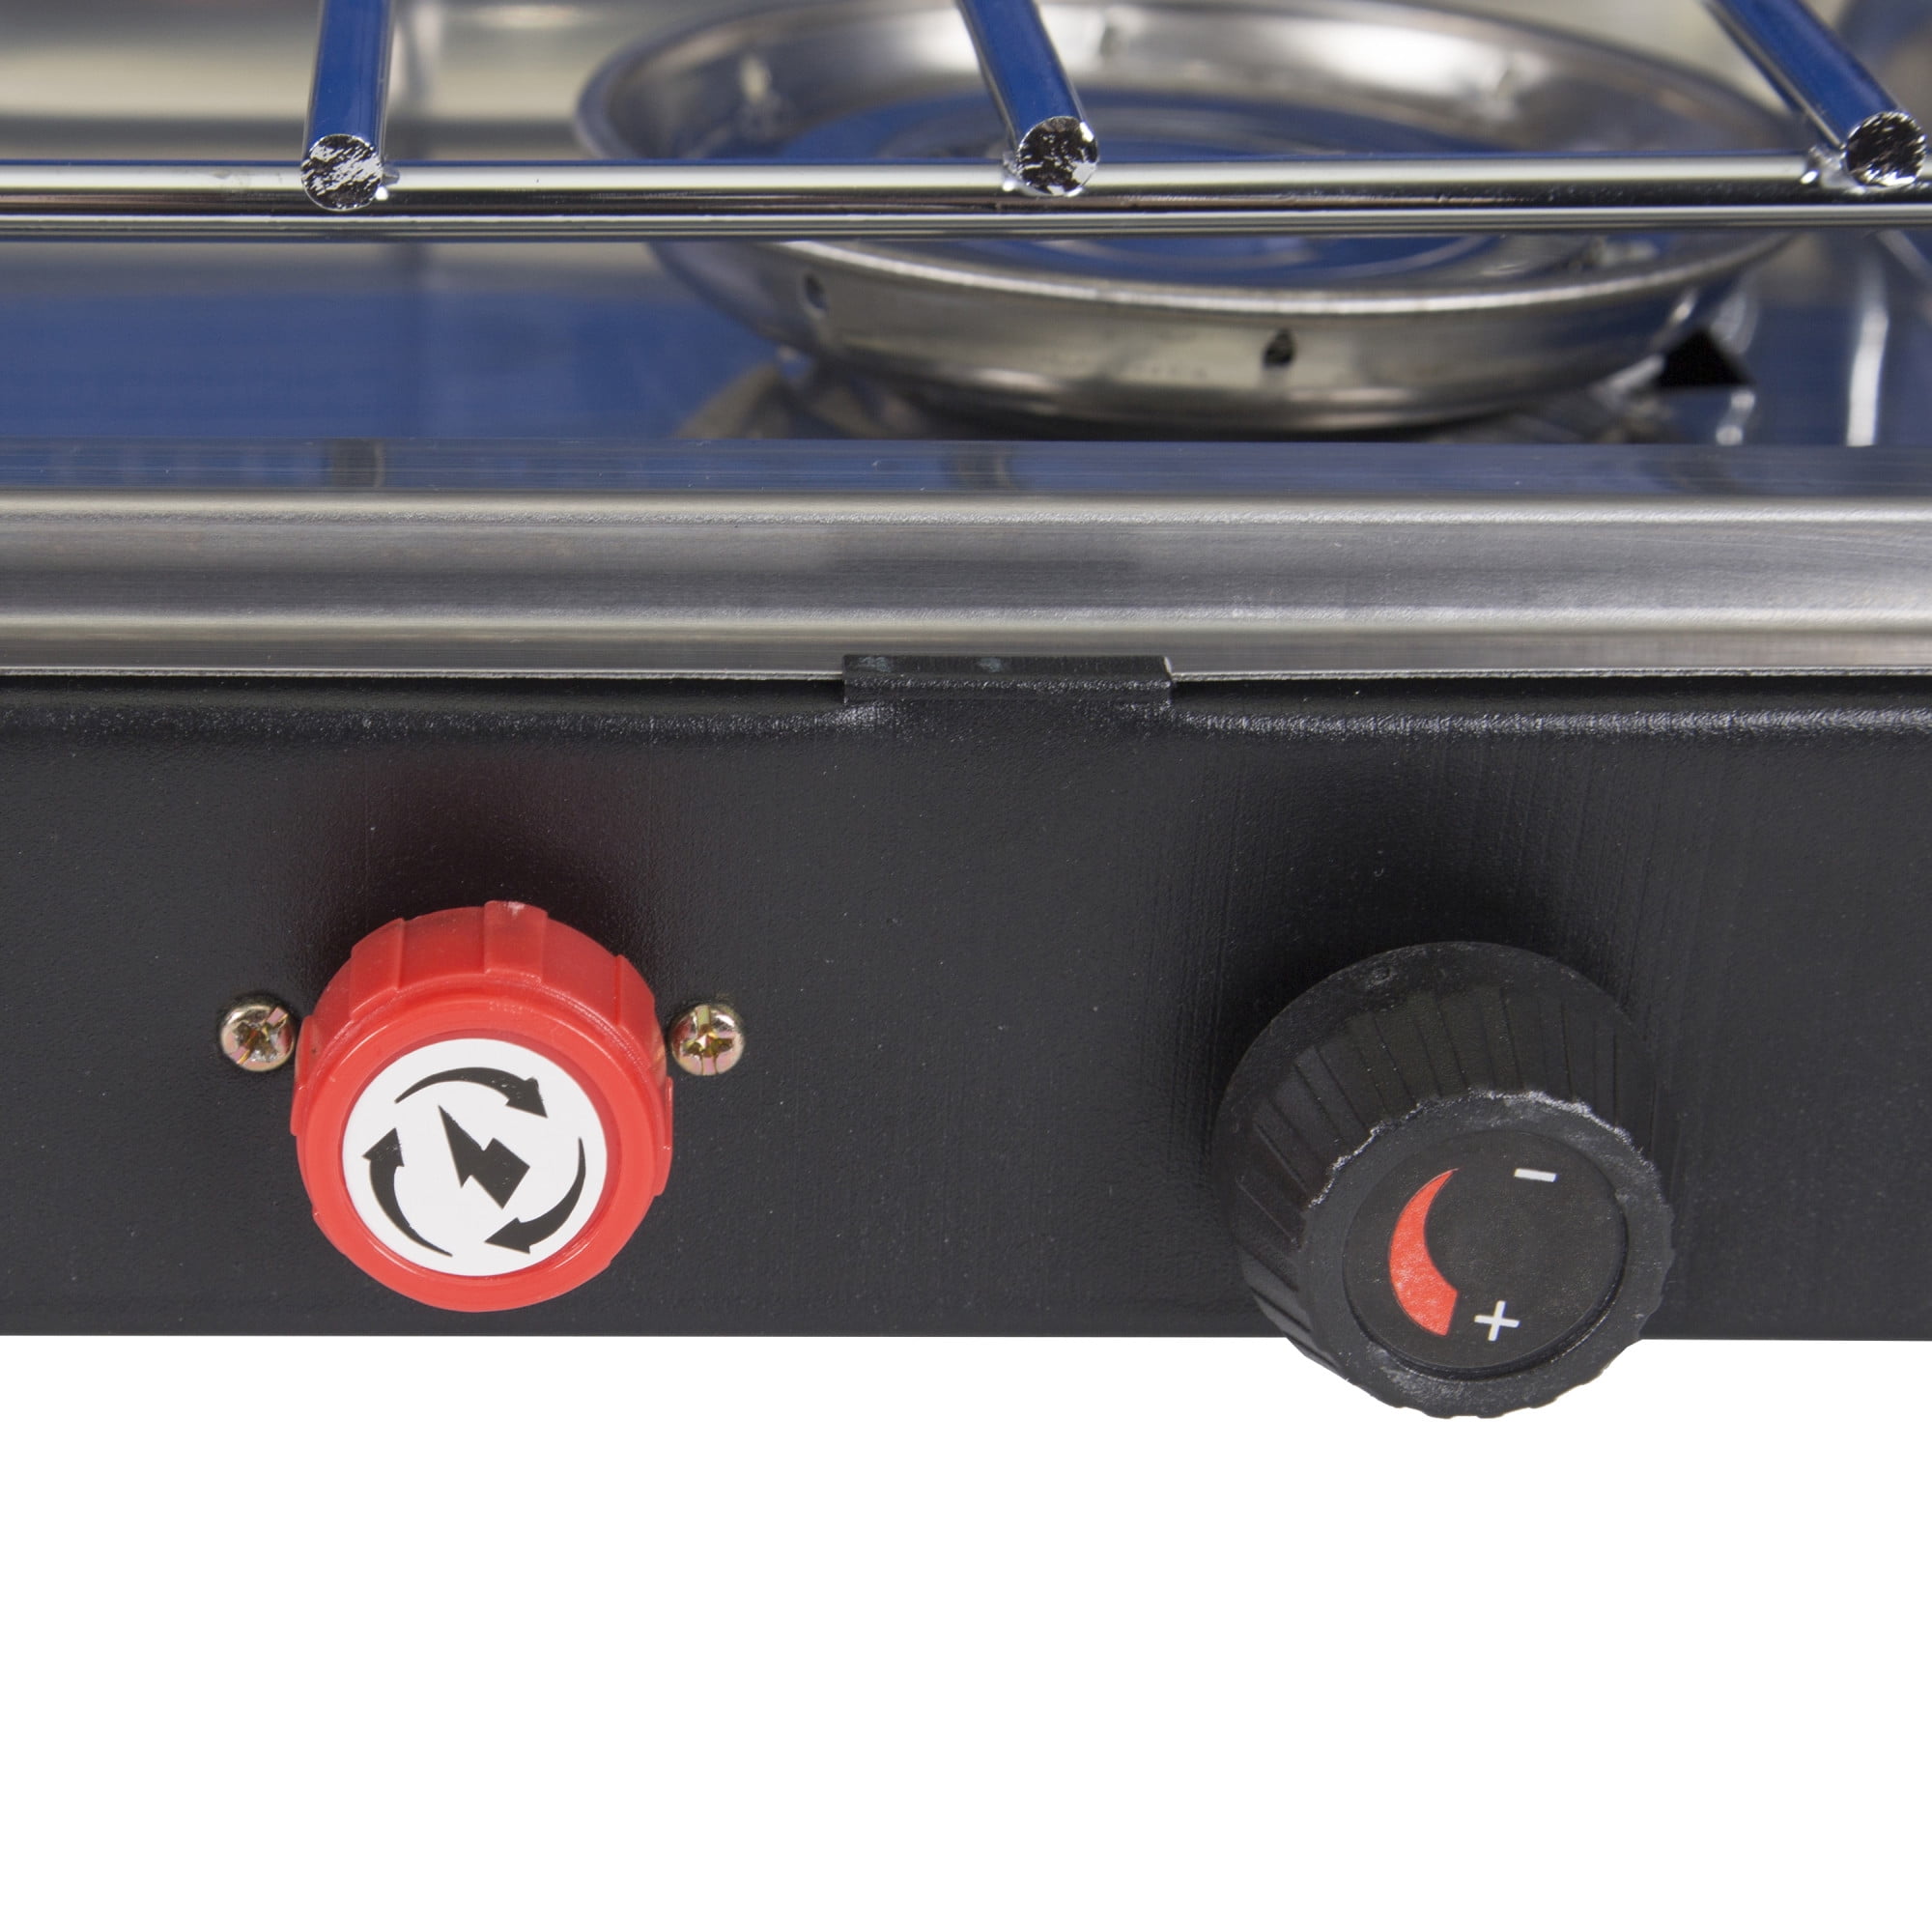 Stansport 2-Burner Propane Stove With Piezo - Blue, 18 x 10 x 4 in - Fred  Meyer